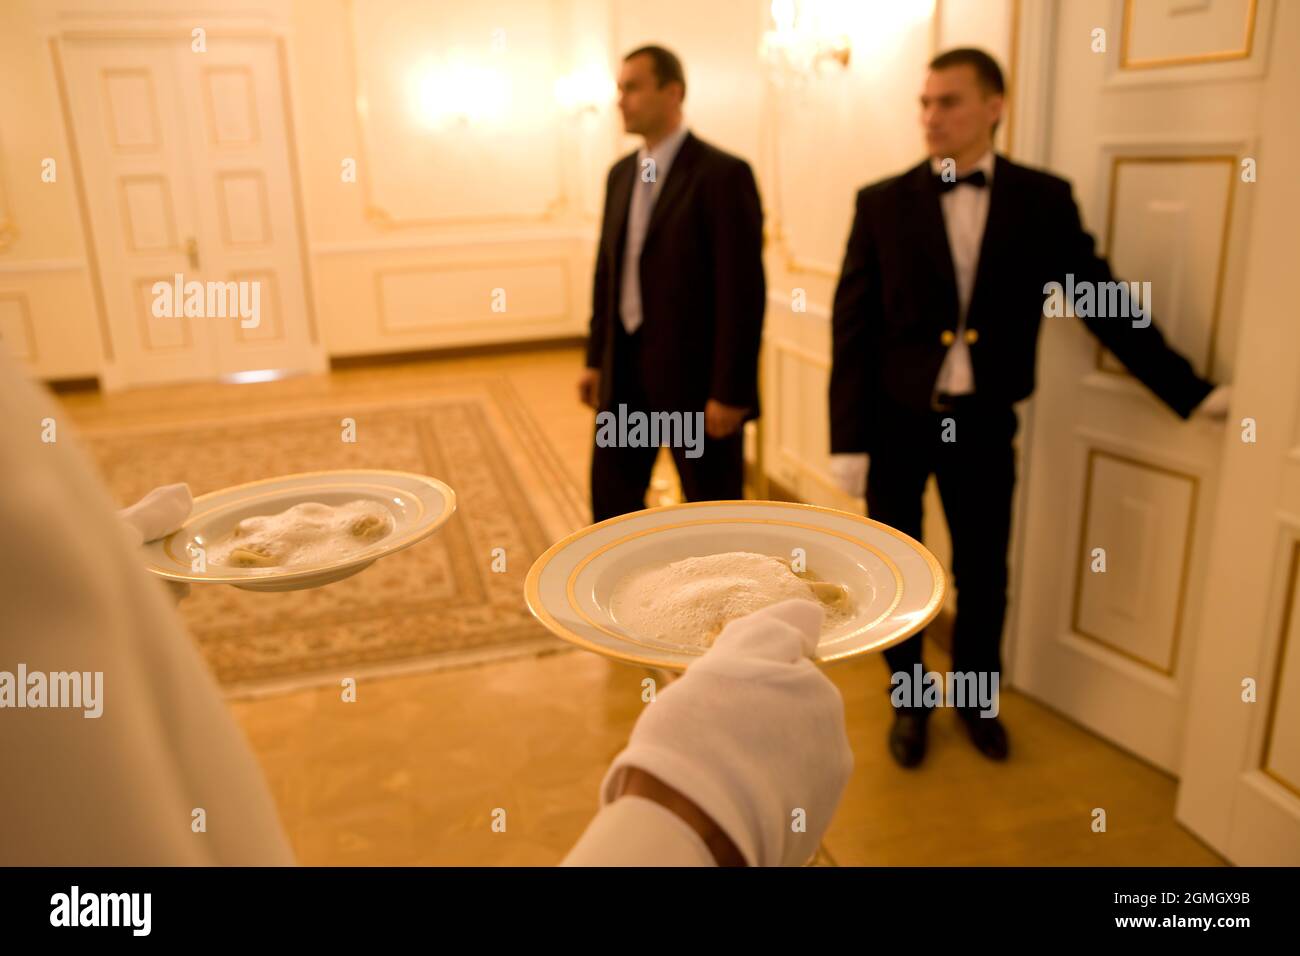 Food is served at a breakfast meeting between President Barack Obama and Prime Minister Vladimir Putin at Putin's dacha outside Moscow, Russia, July 7, 2009.  (Official White House Photo by Pete Souza)  This official White House photograph is being made available for publication by news organizations and/or for personal use printing by the subject(s) of the photograph. The photograph may not be manipulated in any way or used in materials, advertisements, products, or promotions that in any way suggest approval or endorsement of the President, the First Family, or the White House. Stock Photo